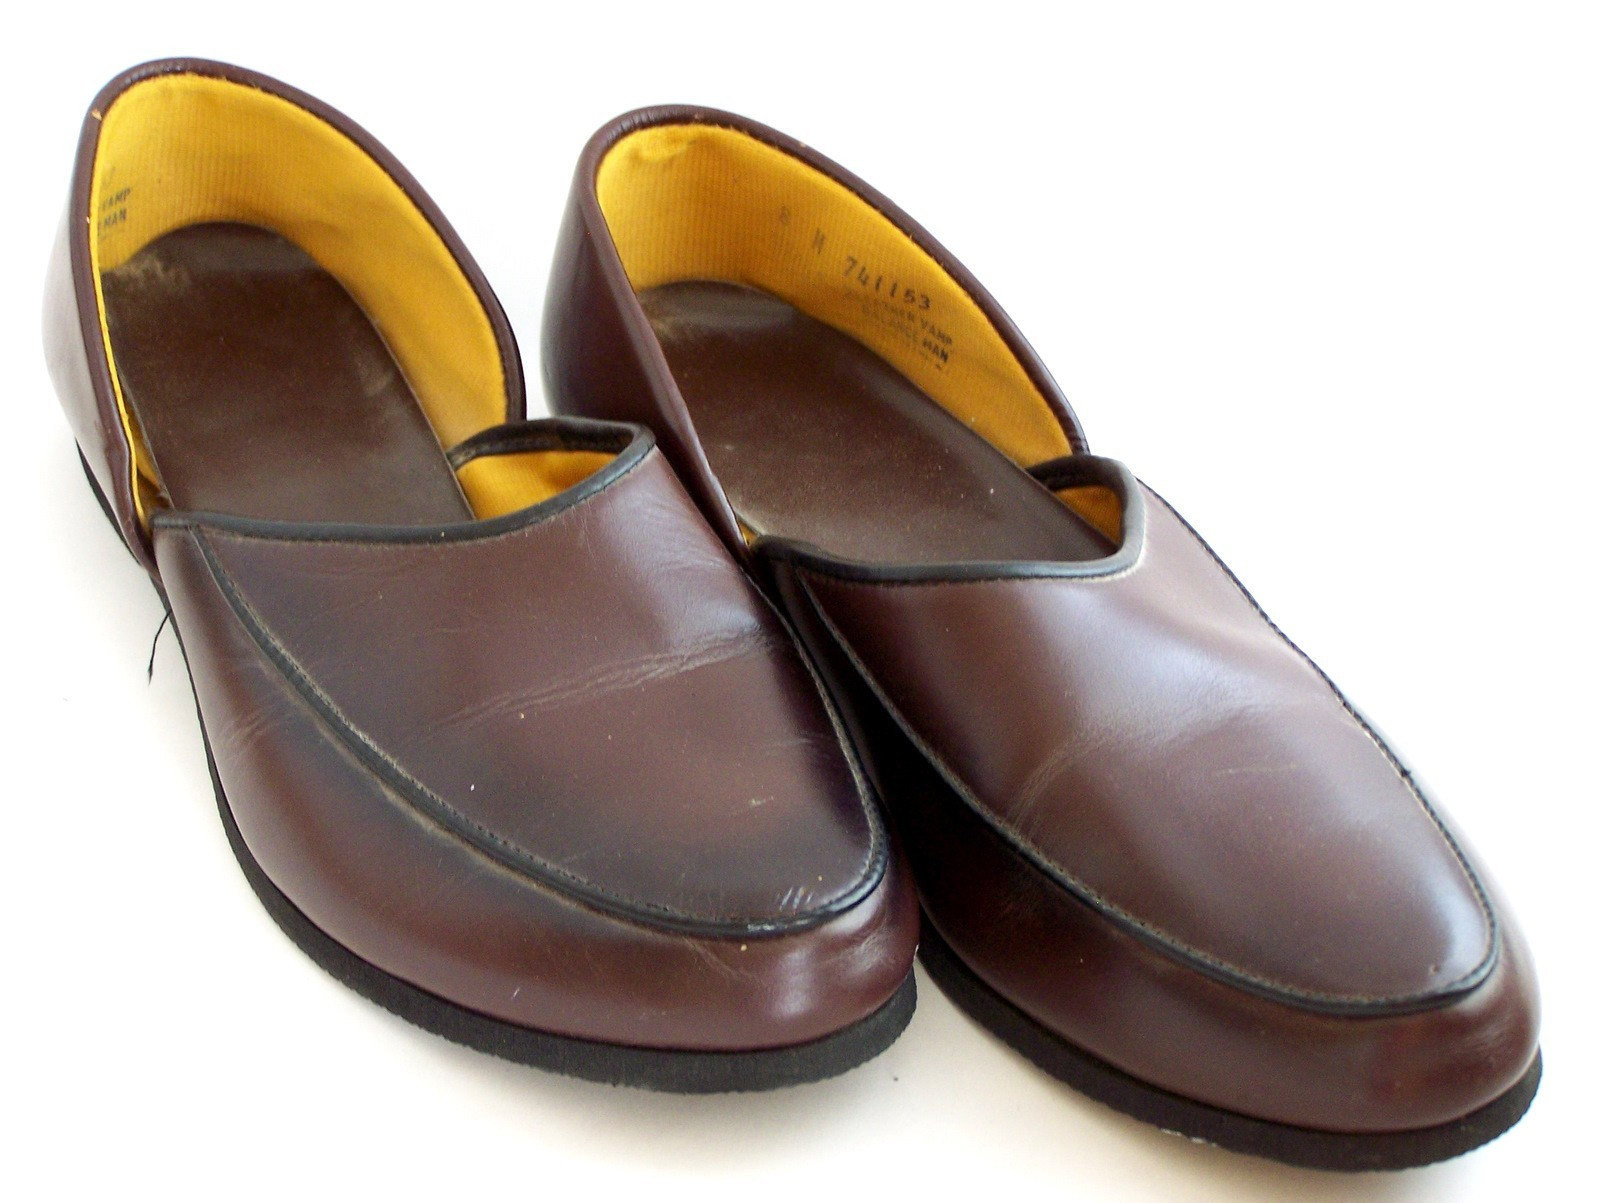 Mens Leather Bedroom Slippers
 Vintage Mens House Slippers ala Father Knows Best by daisytoad